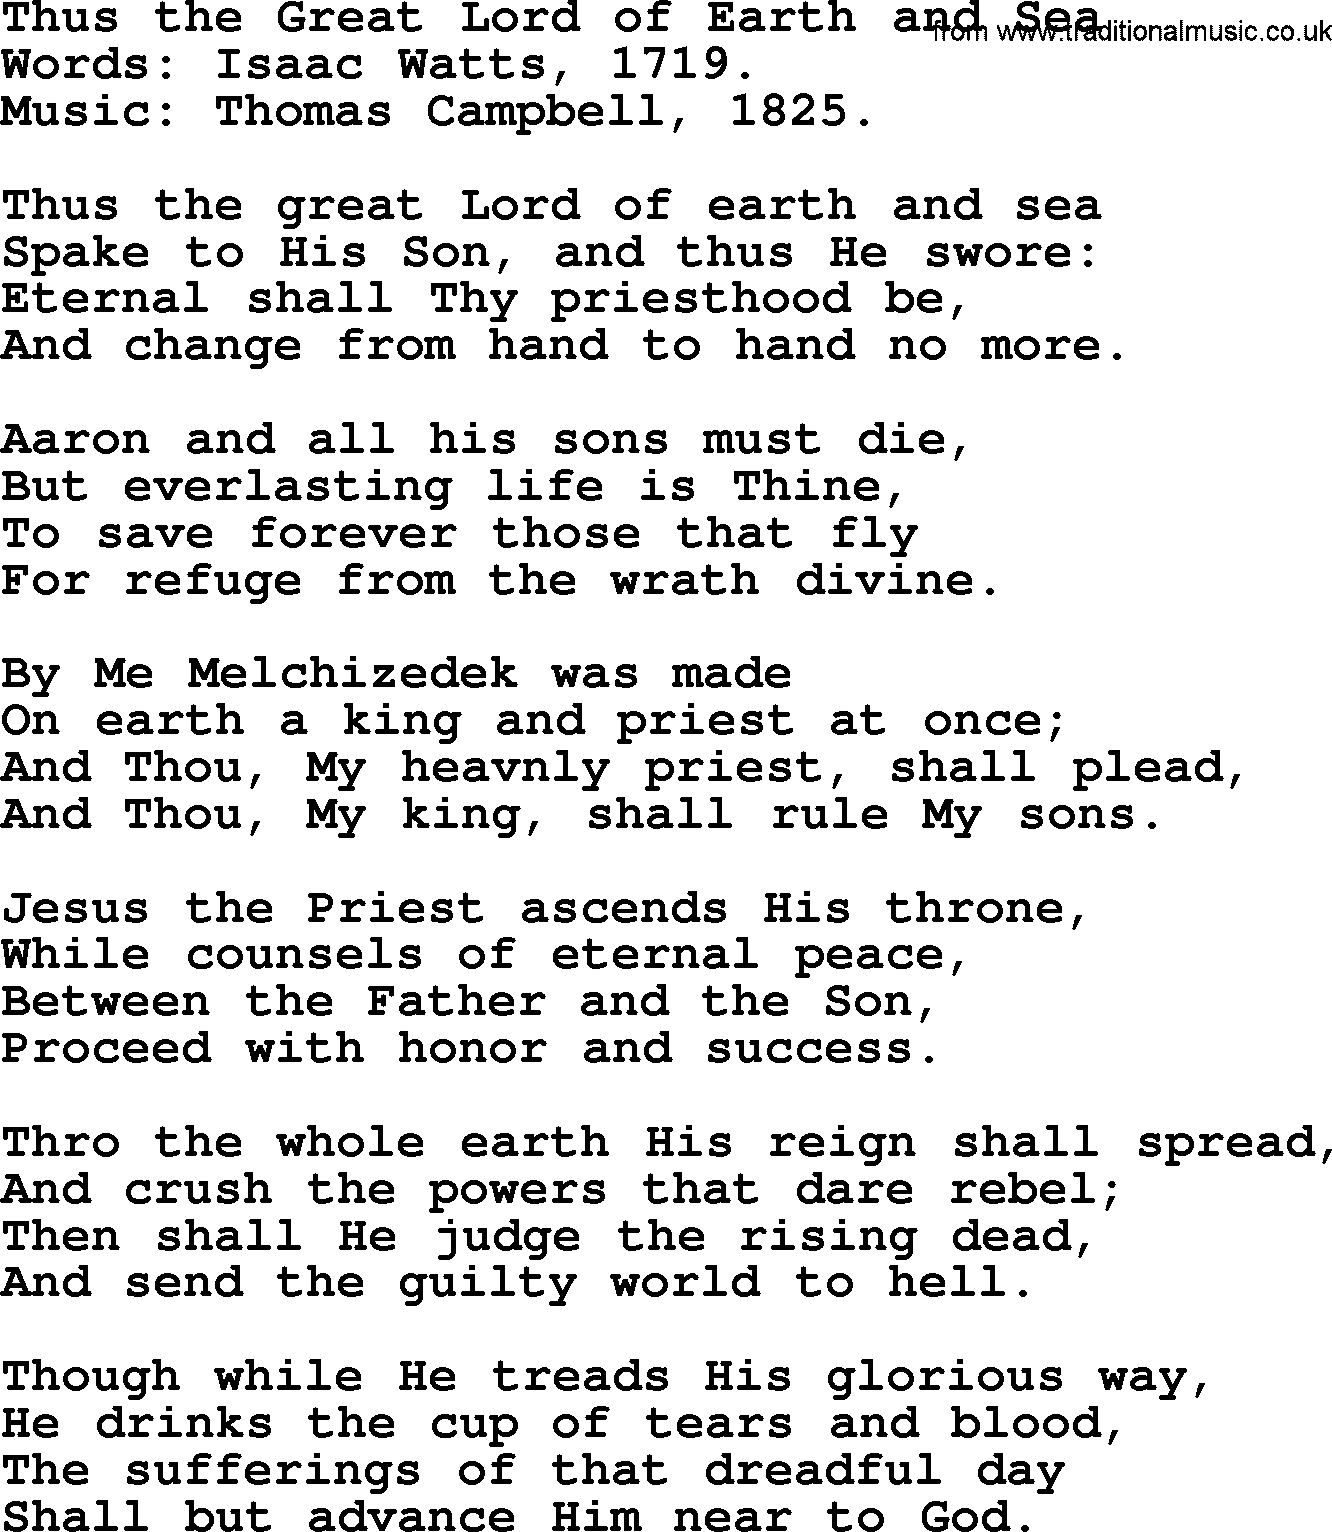 Isaac Watts Christian hymn: Thus the Great Lord of Earth and Sea- lyricss